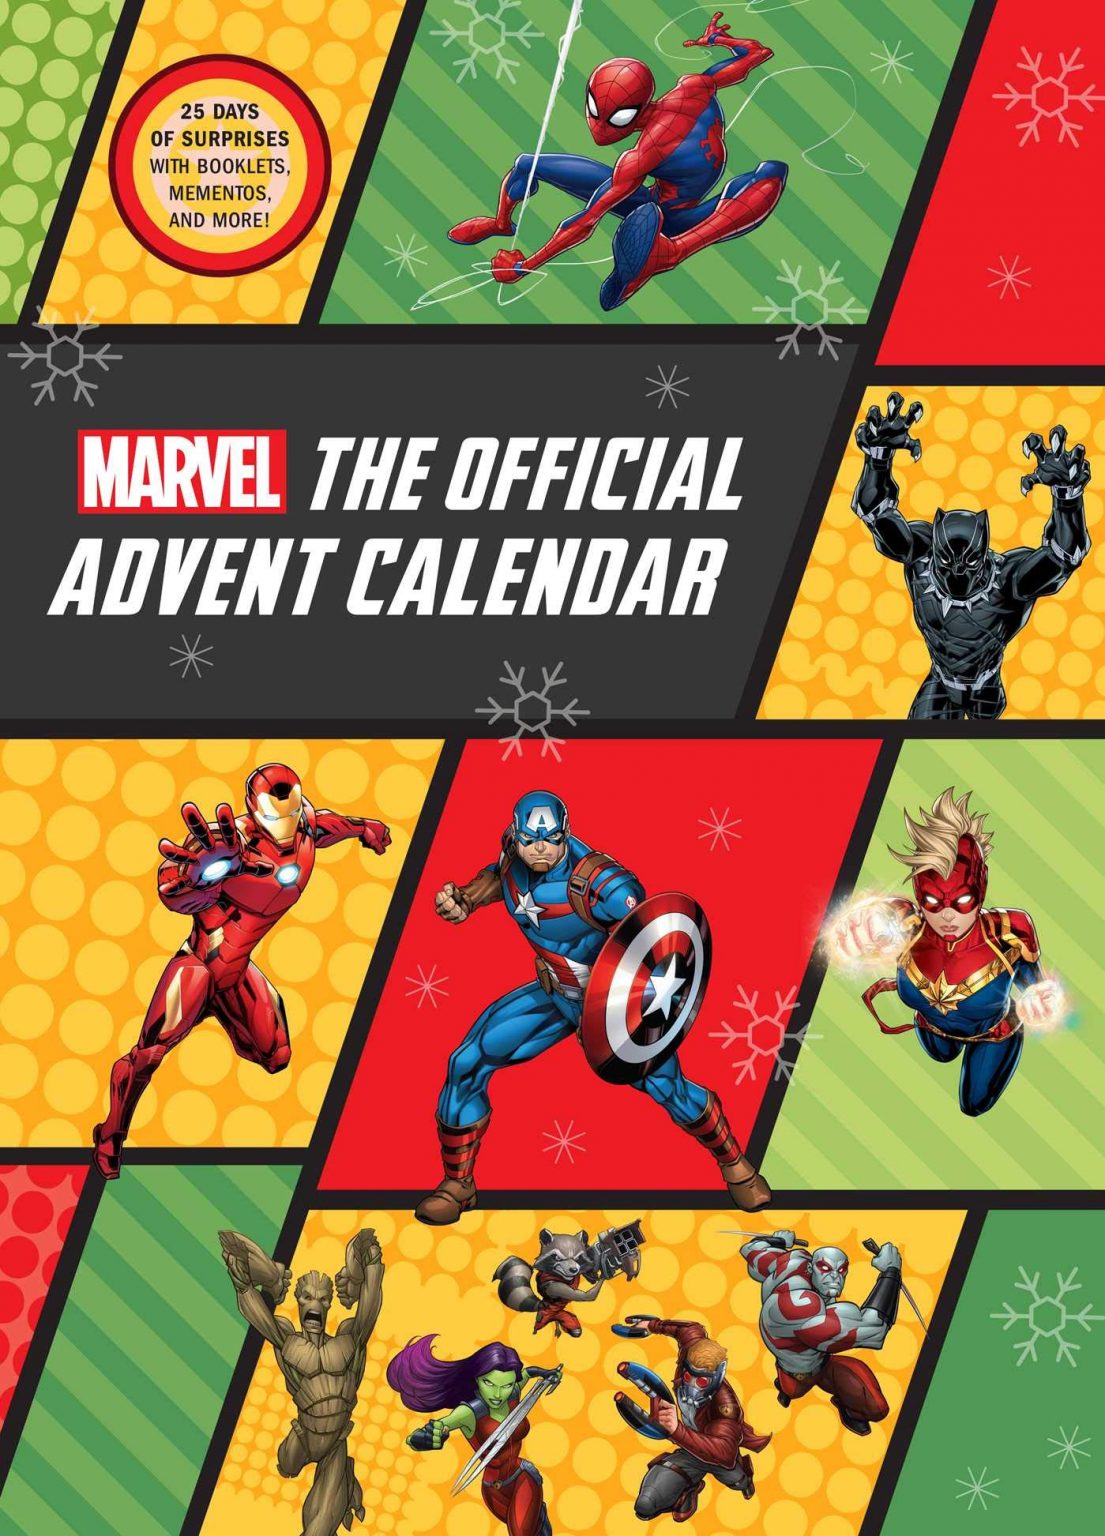 CHRISTMAS IN JULY Let’s Check Out MARVEL’s Advent Calendar